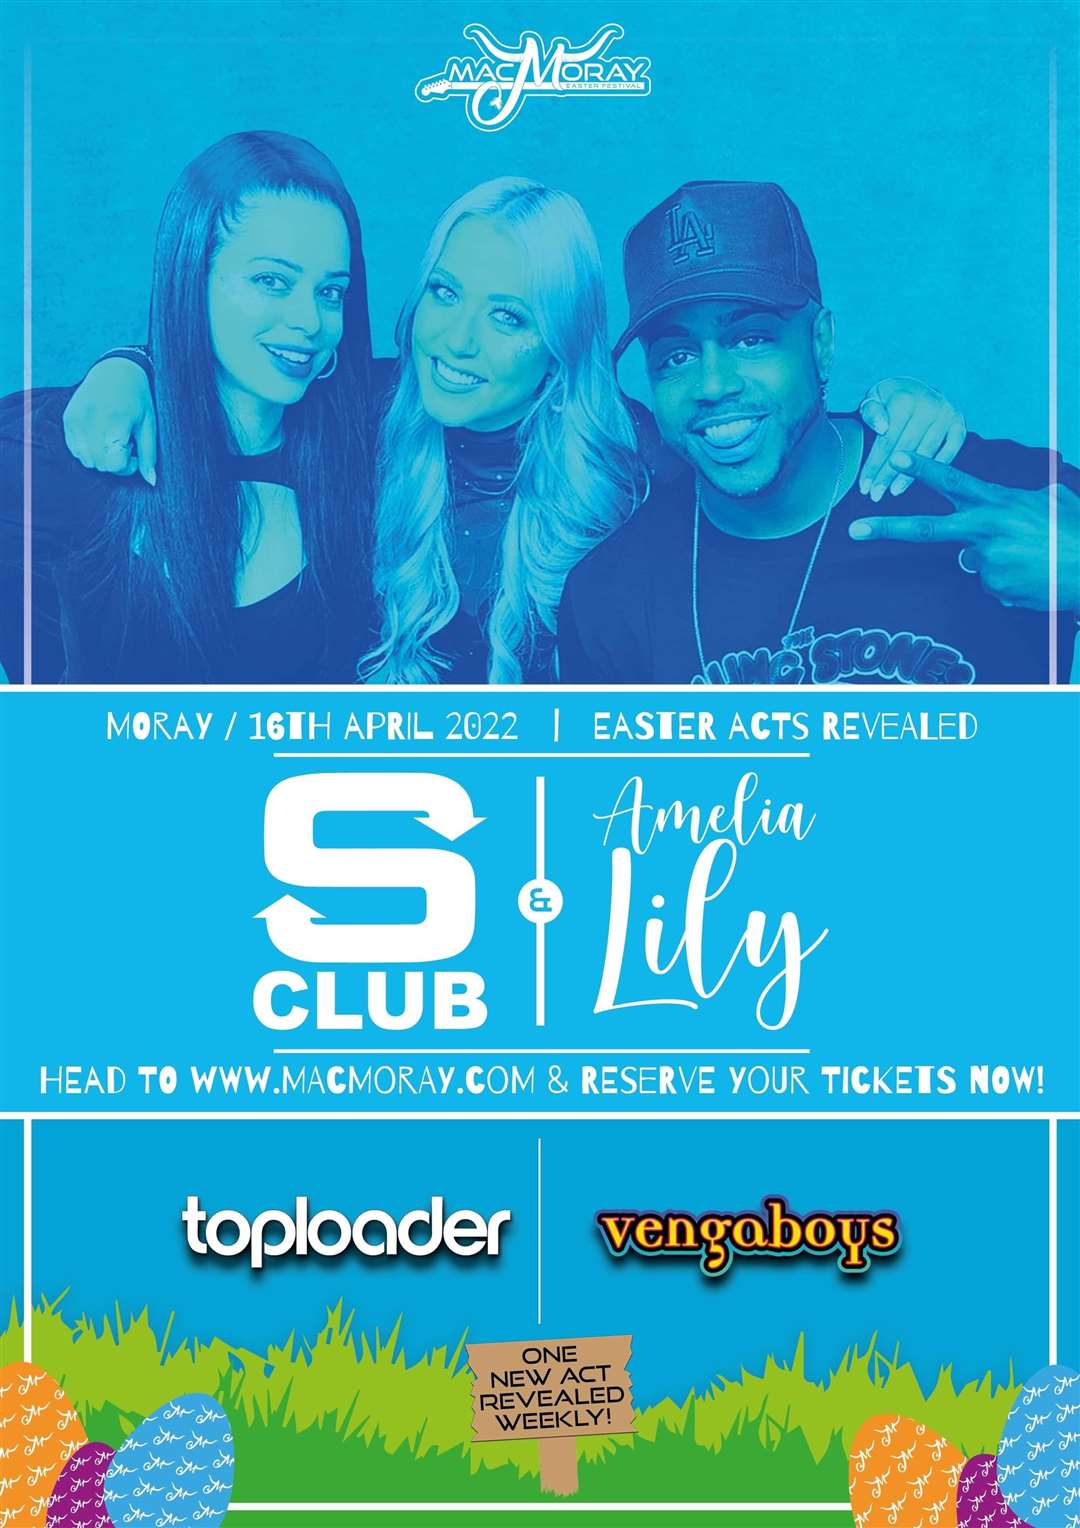 Original S Club 7 members Bradley McIntosh and Tina Barrett will be joined by X Factor finalist and Big Brother runner-up Amelia Lily at the MacMoray Family Easter Festival.